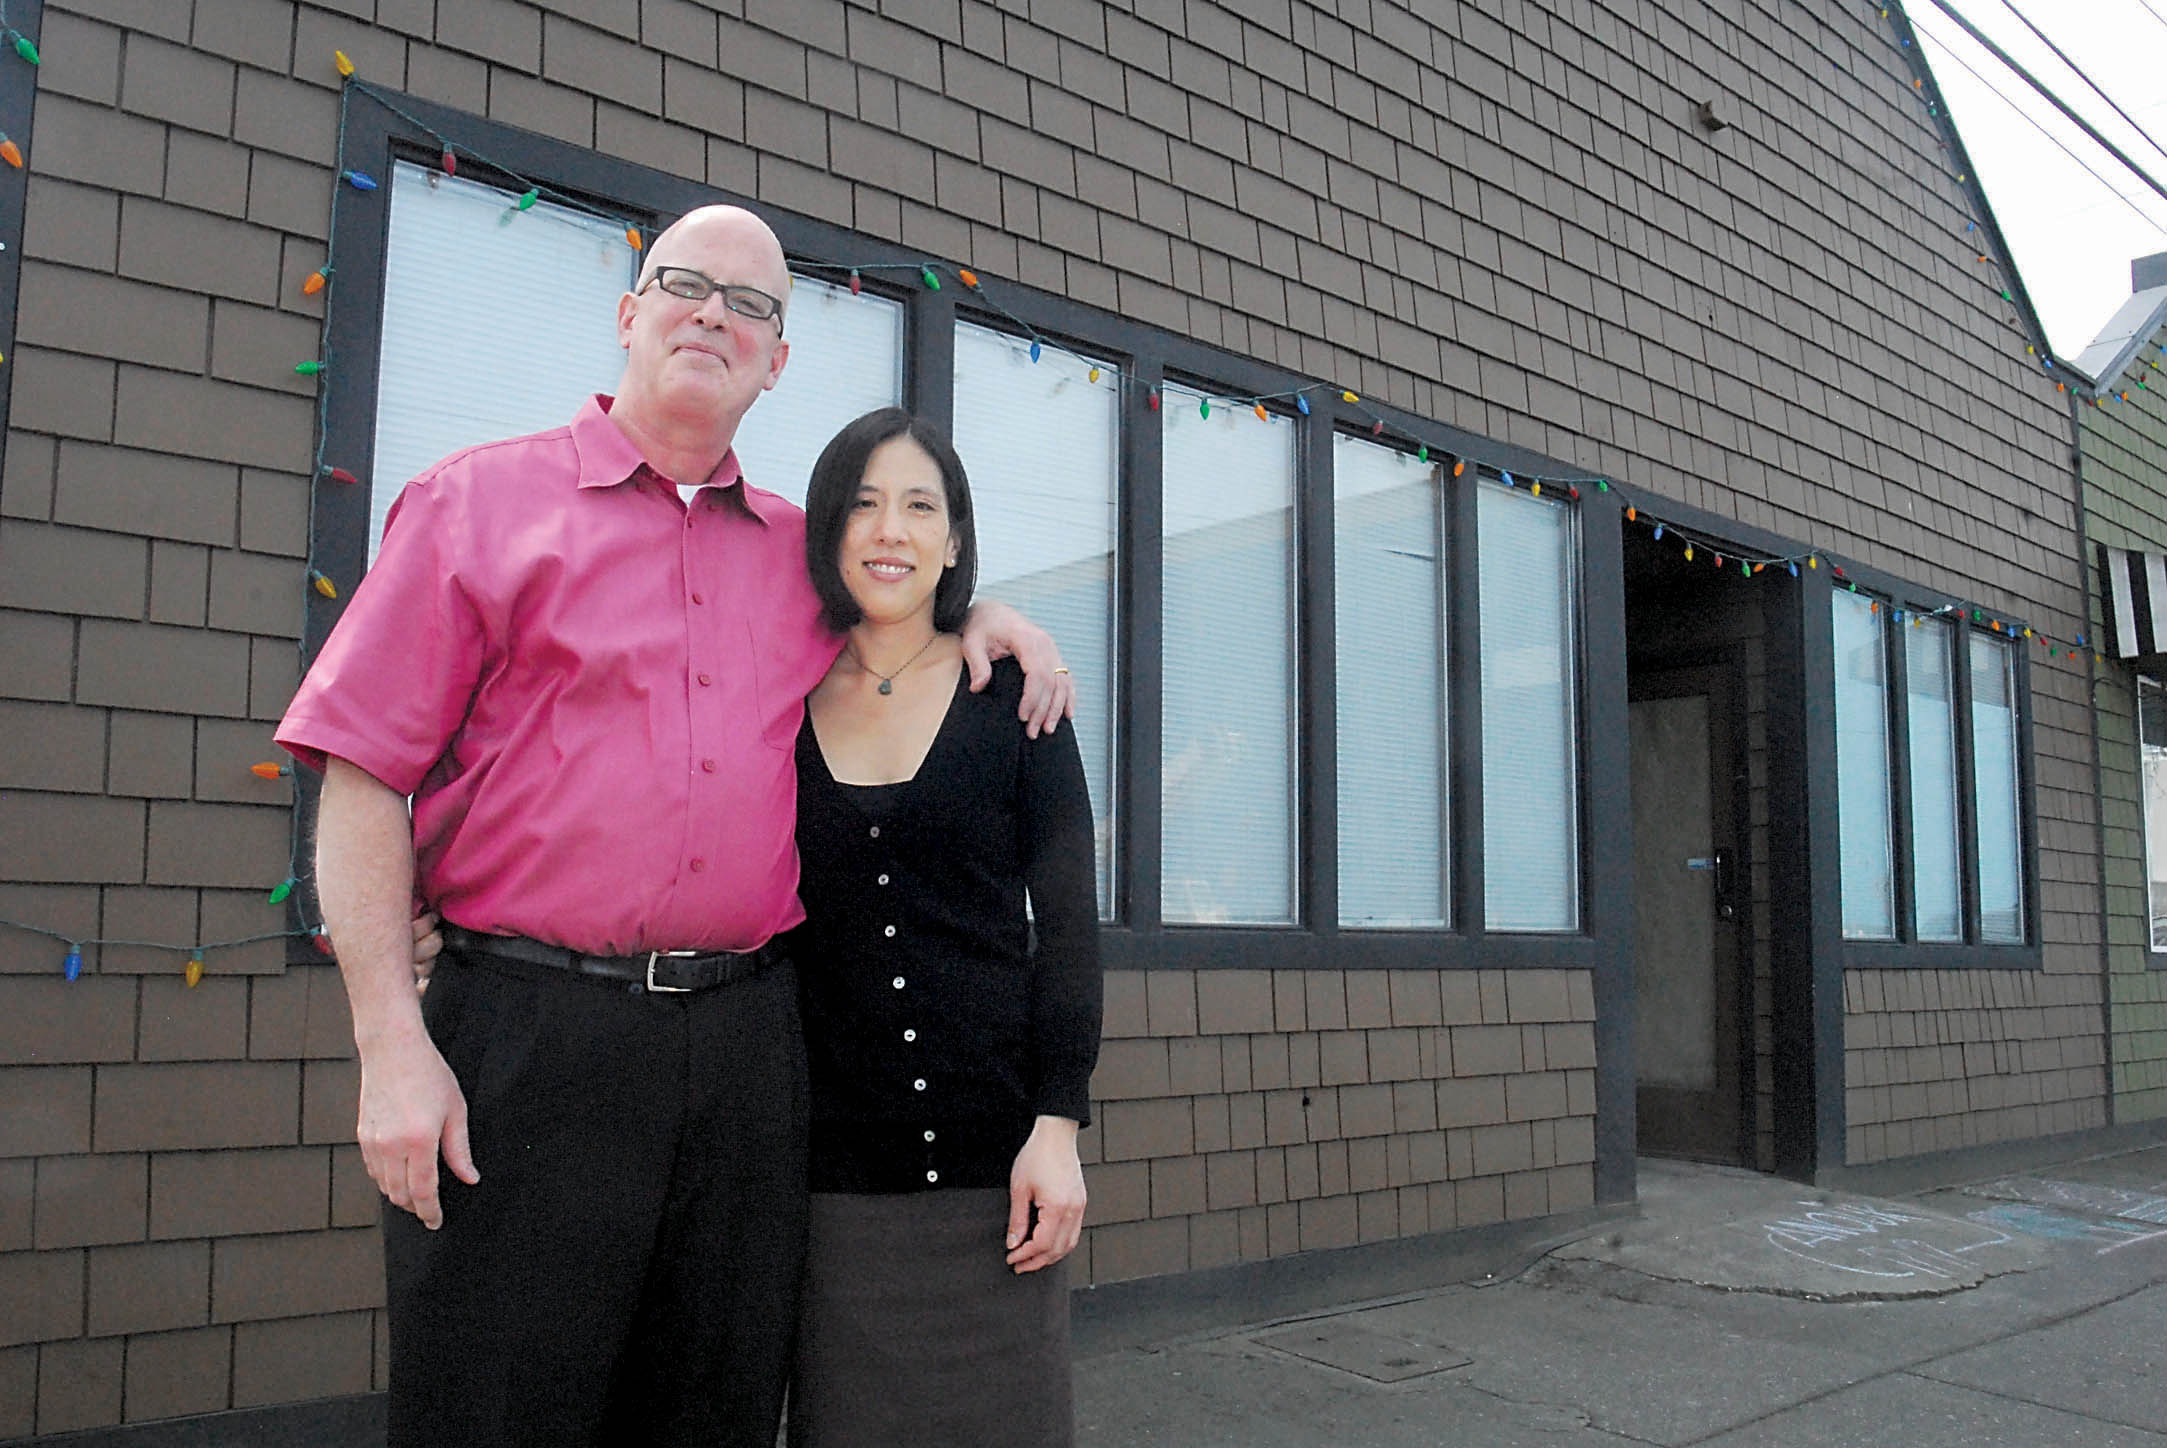 Malik Atwater and Vivian Wai plan to open a retail marijuana shop in an empty storefront adjoining their Colonel Hudson’s Famous Kitchen restaurant on Marine Drive in Port Angeles. — Keith Thorpe/Peninsula Daily News